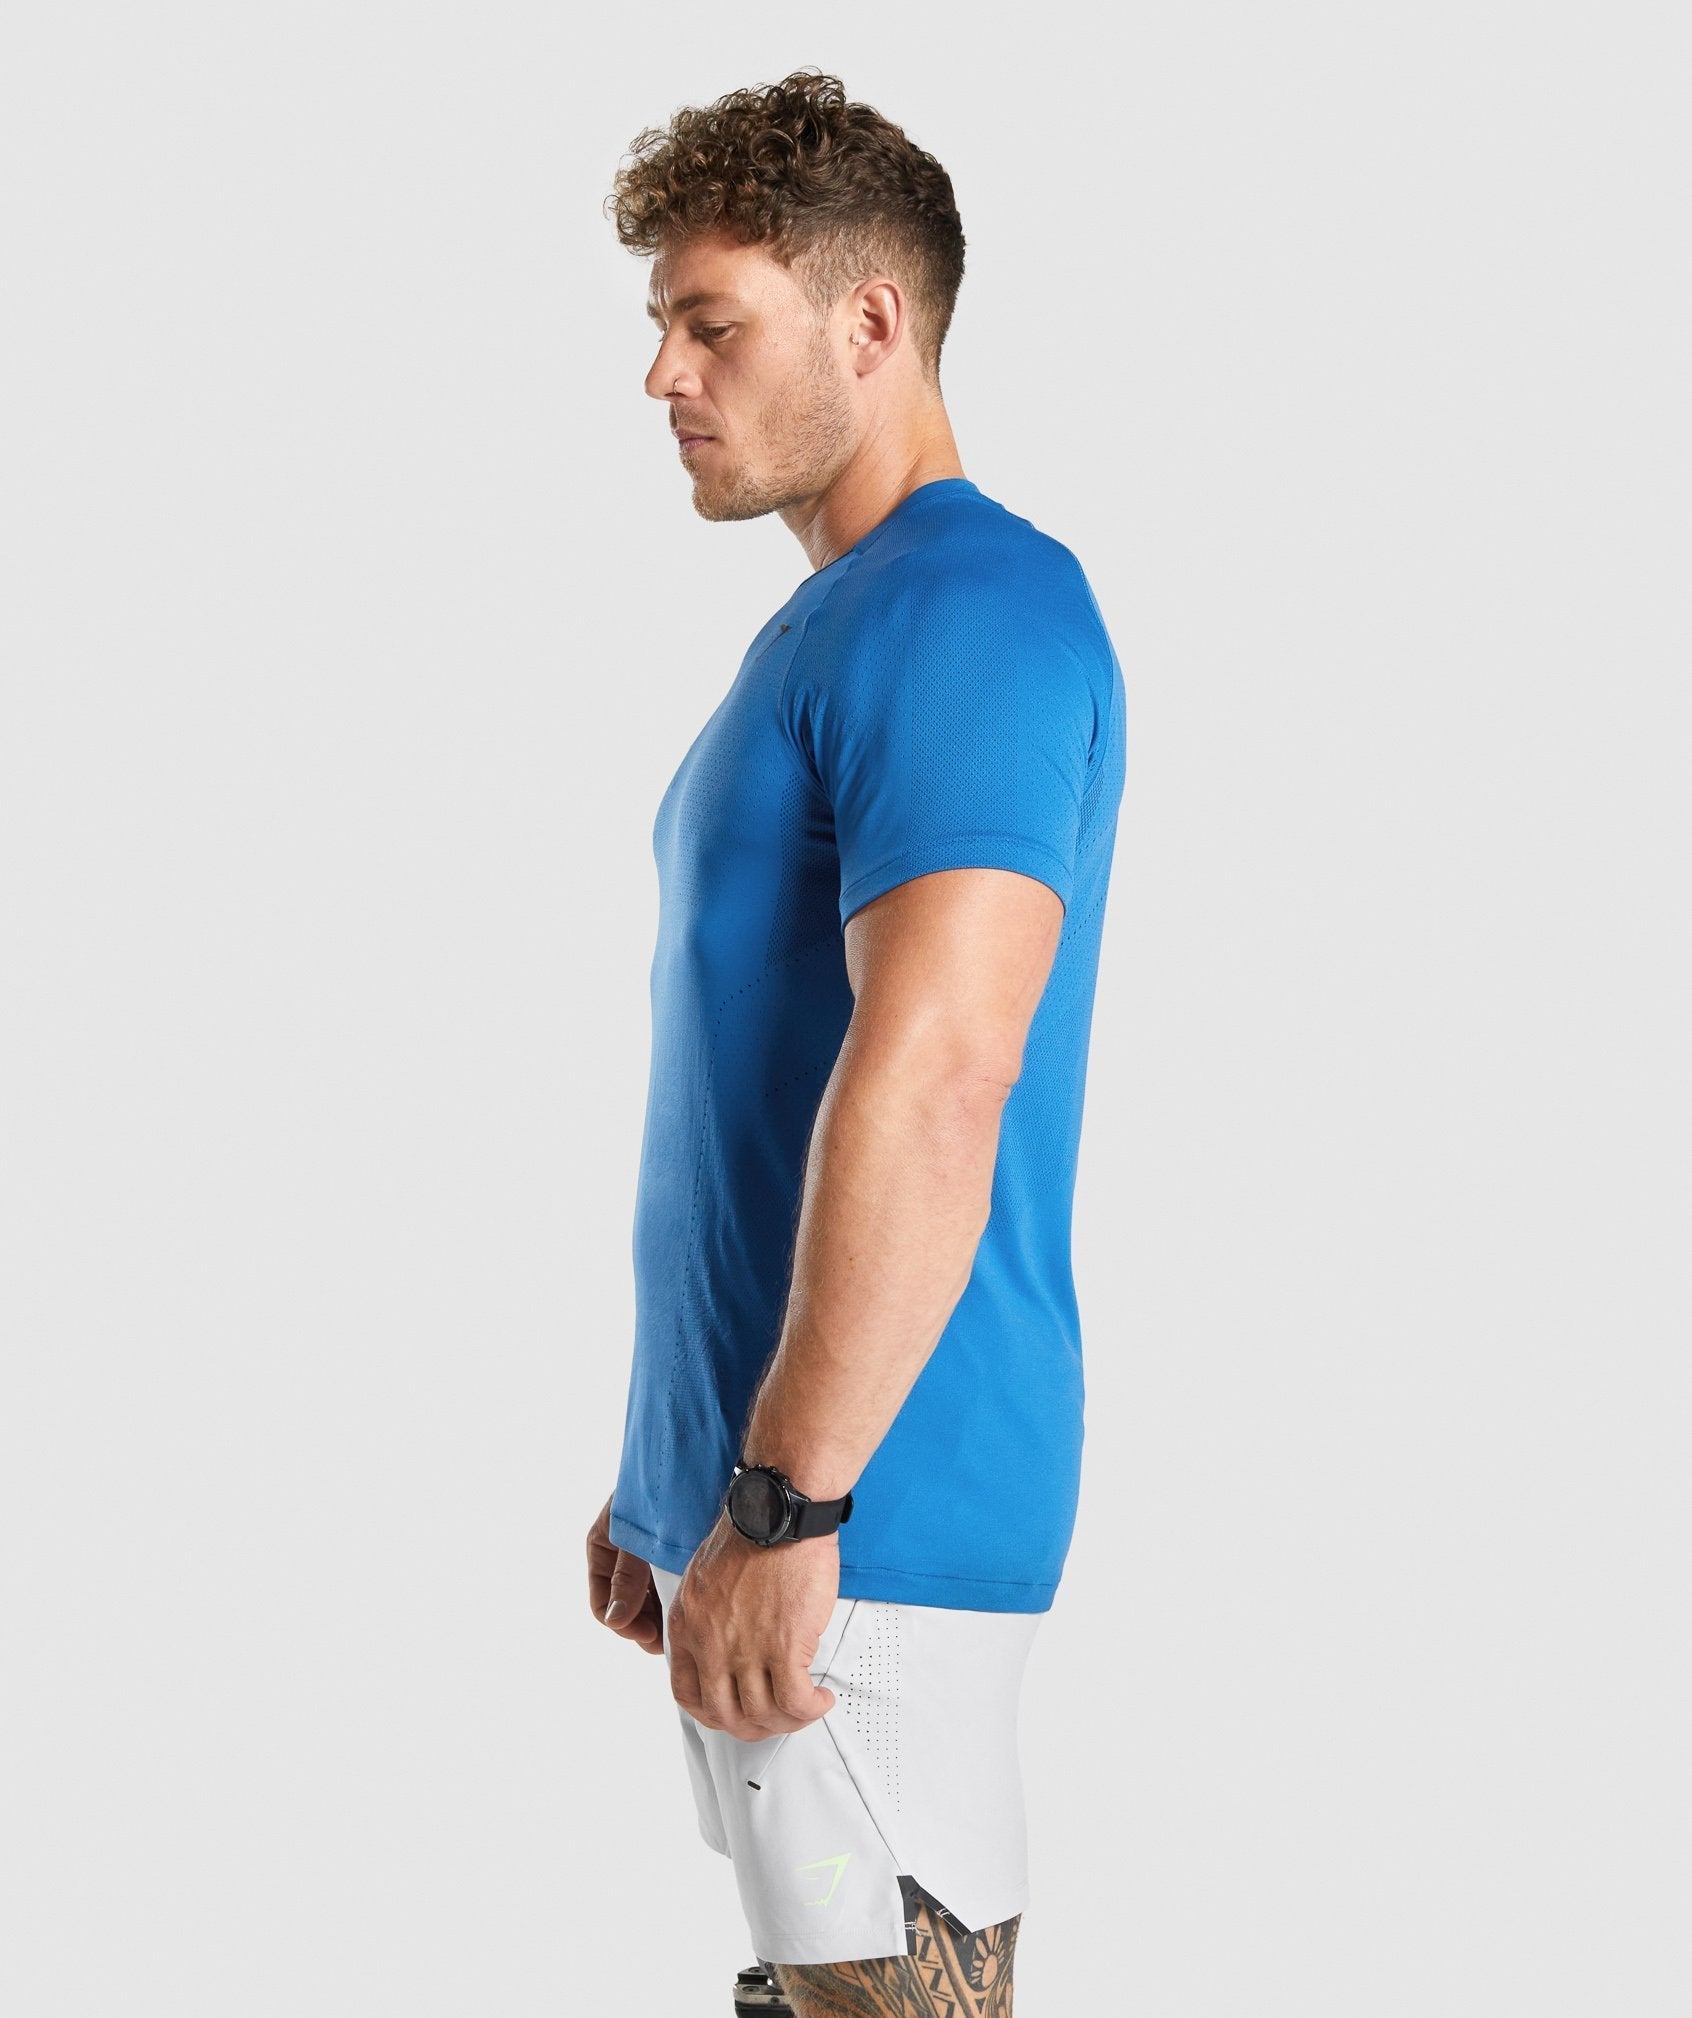 Apex Perform T-shirt in Blue - view 3